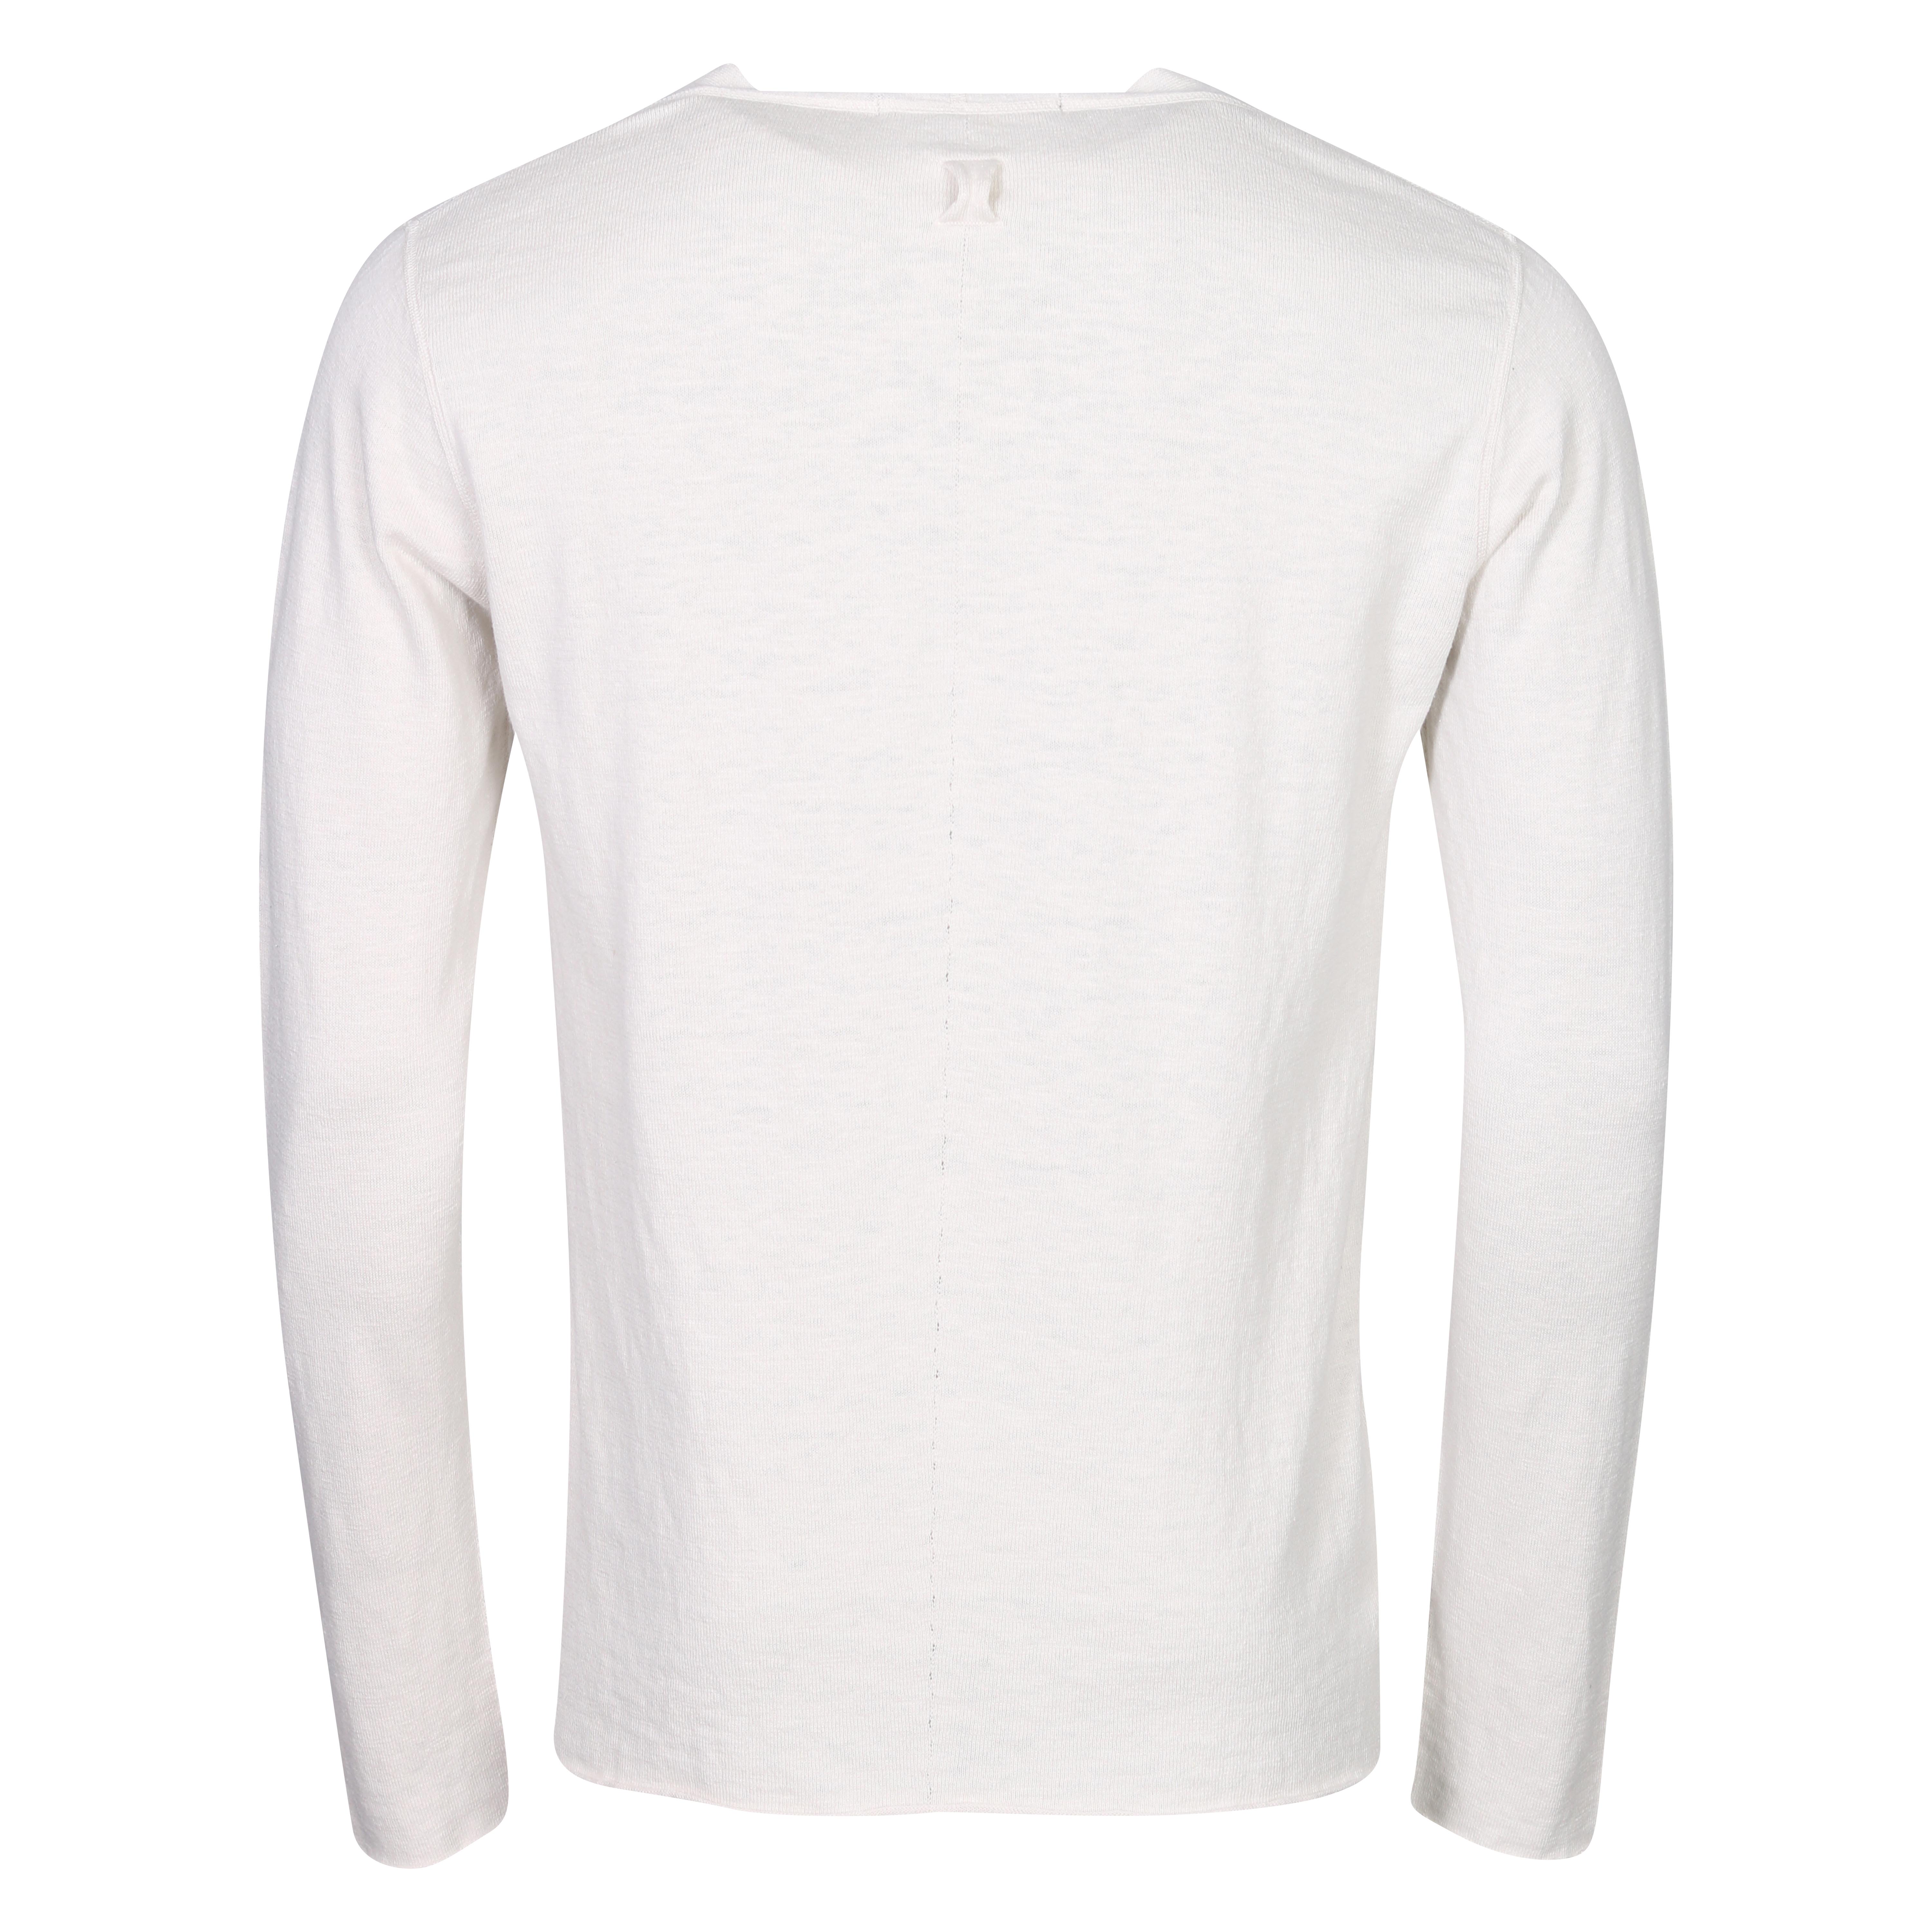 Hannes Roether V-Neck Knit Sweater in Risotto